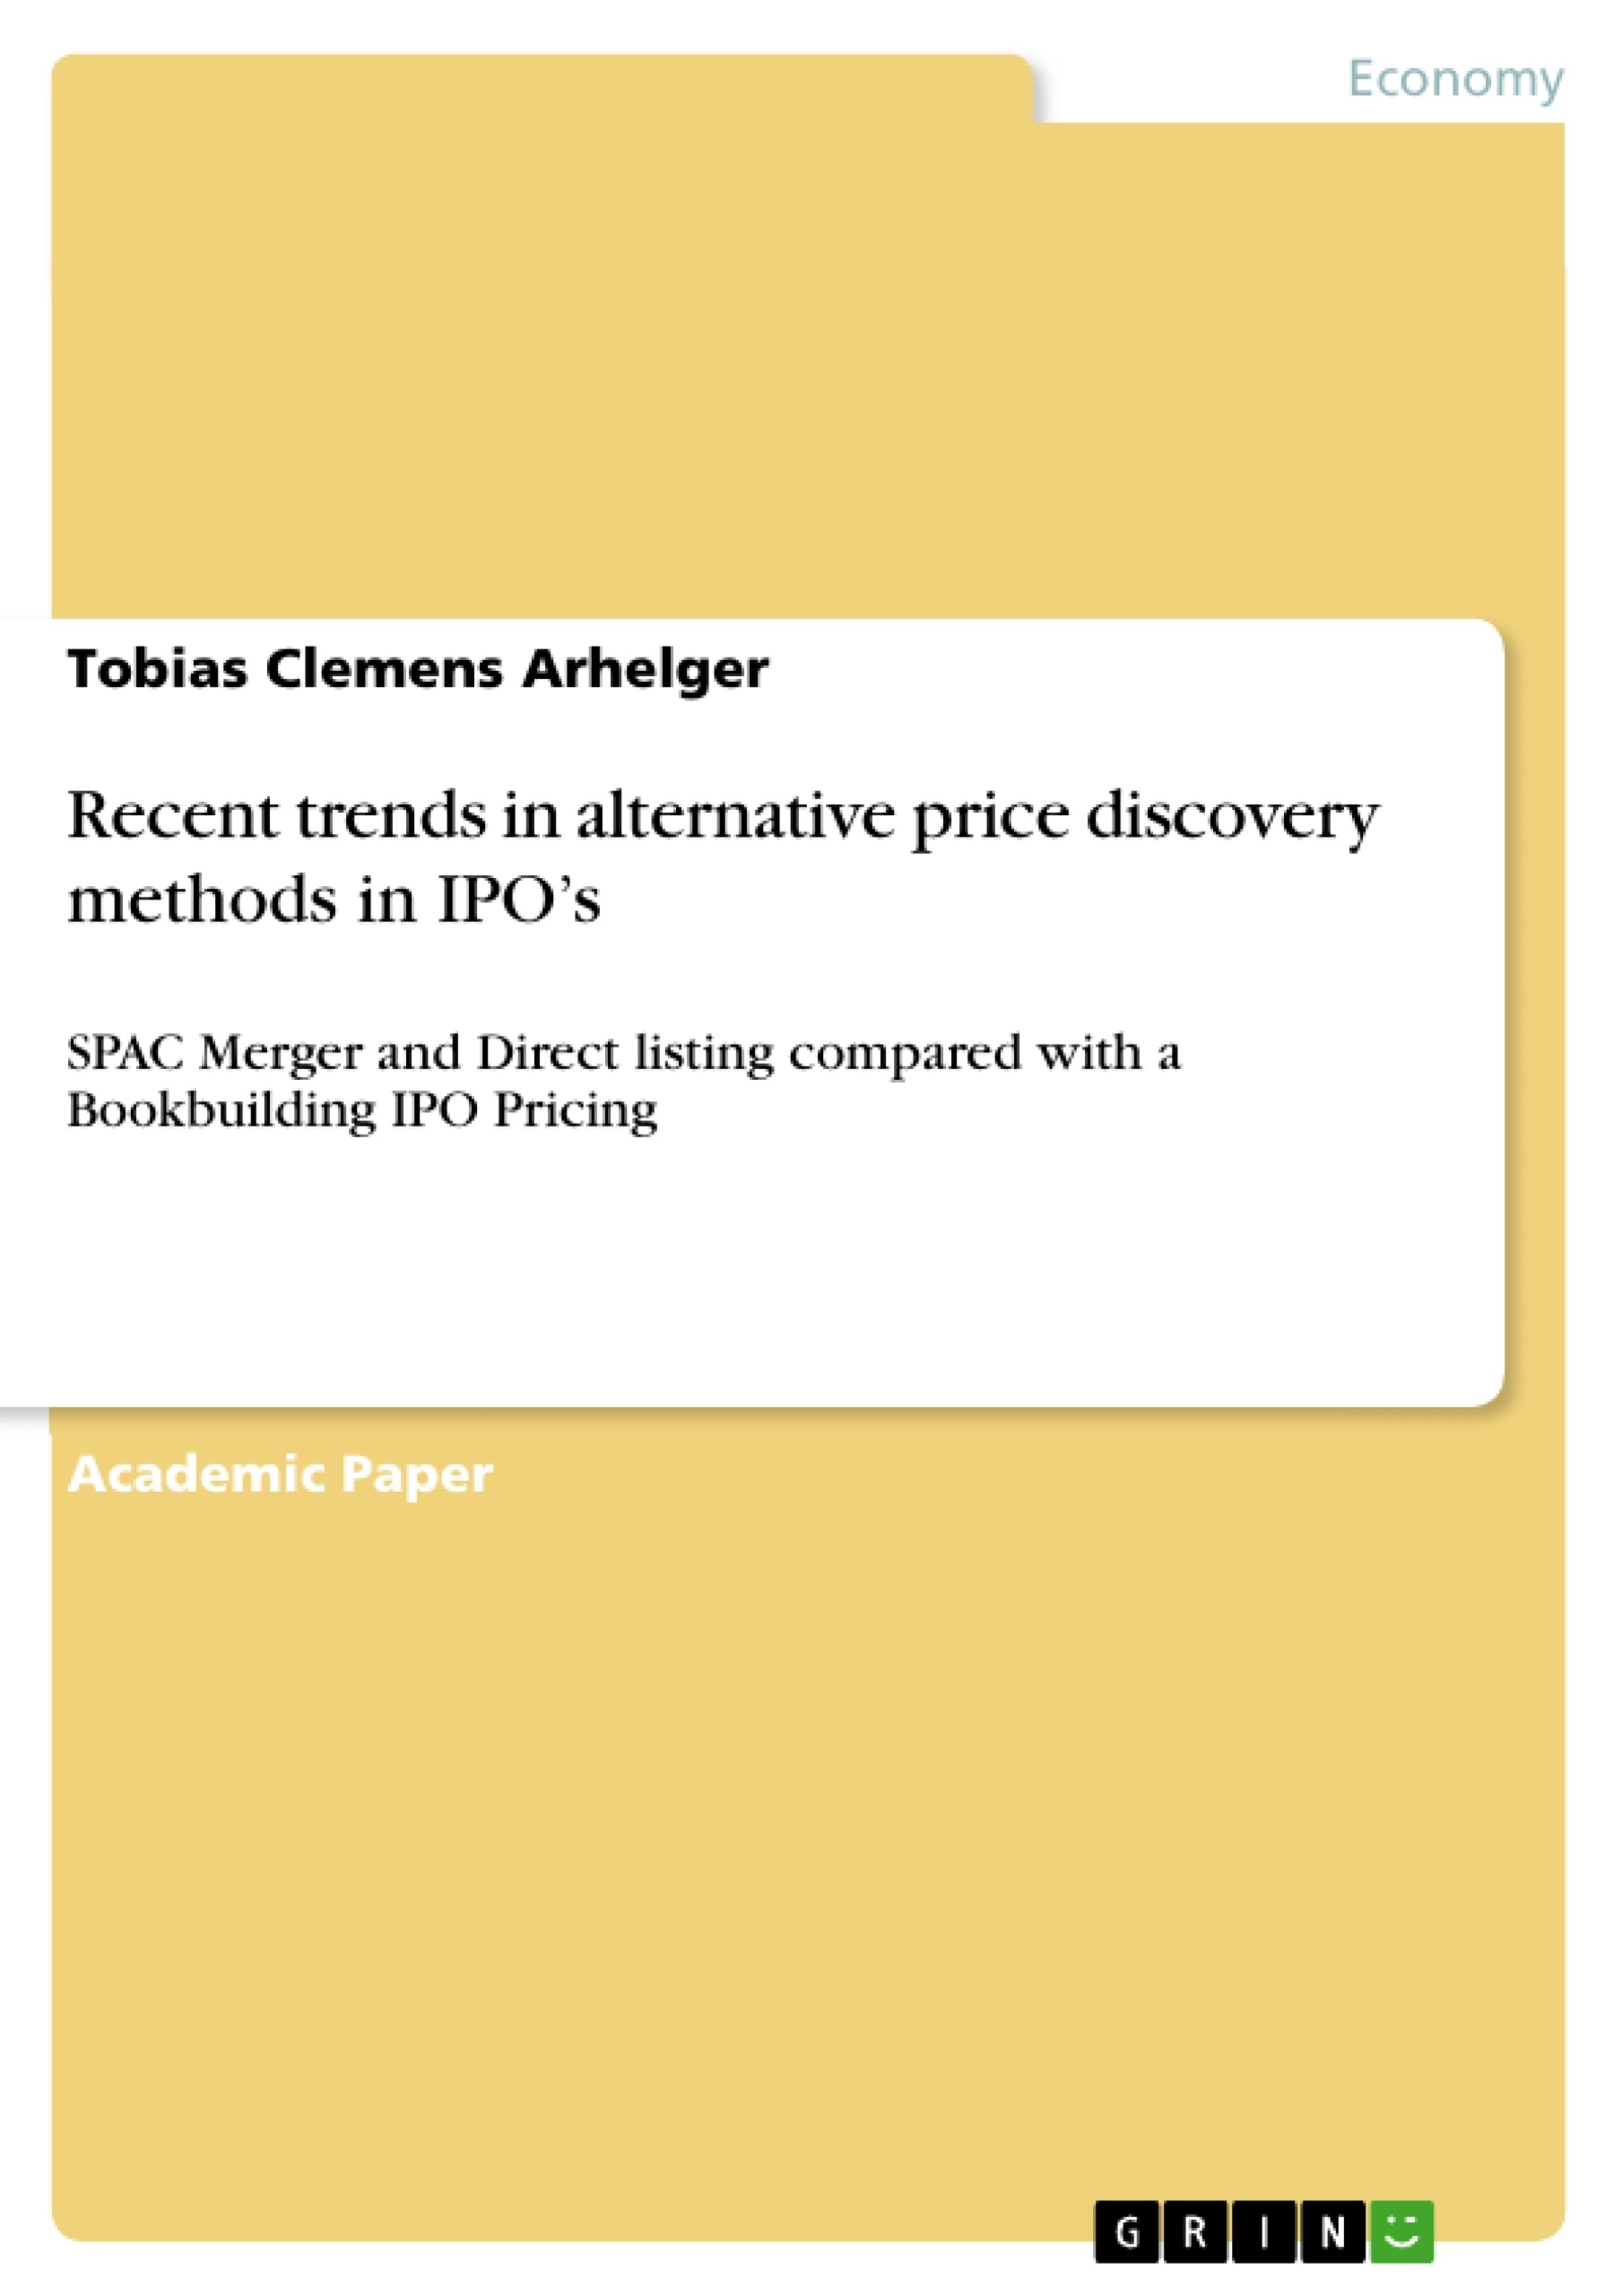 Title: Recent trends in alternative price discovery methods in IPO’s